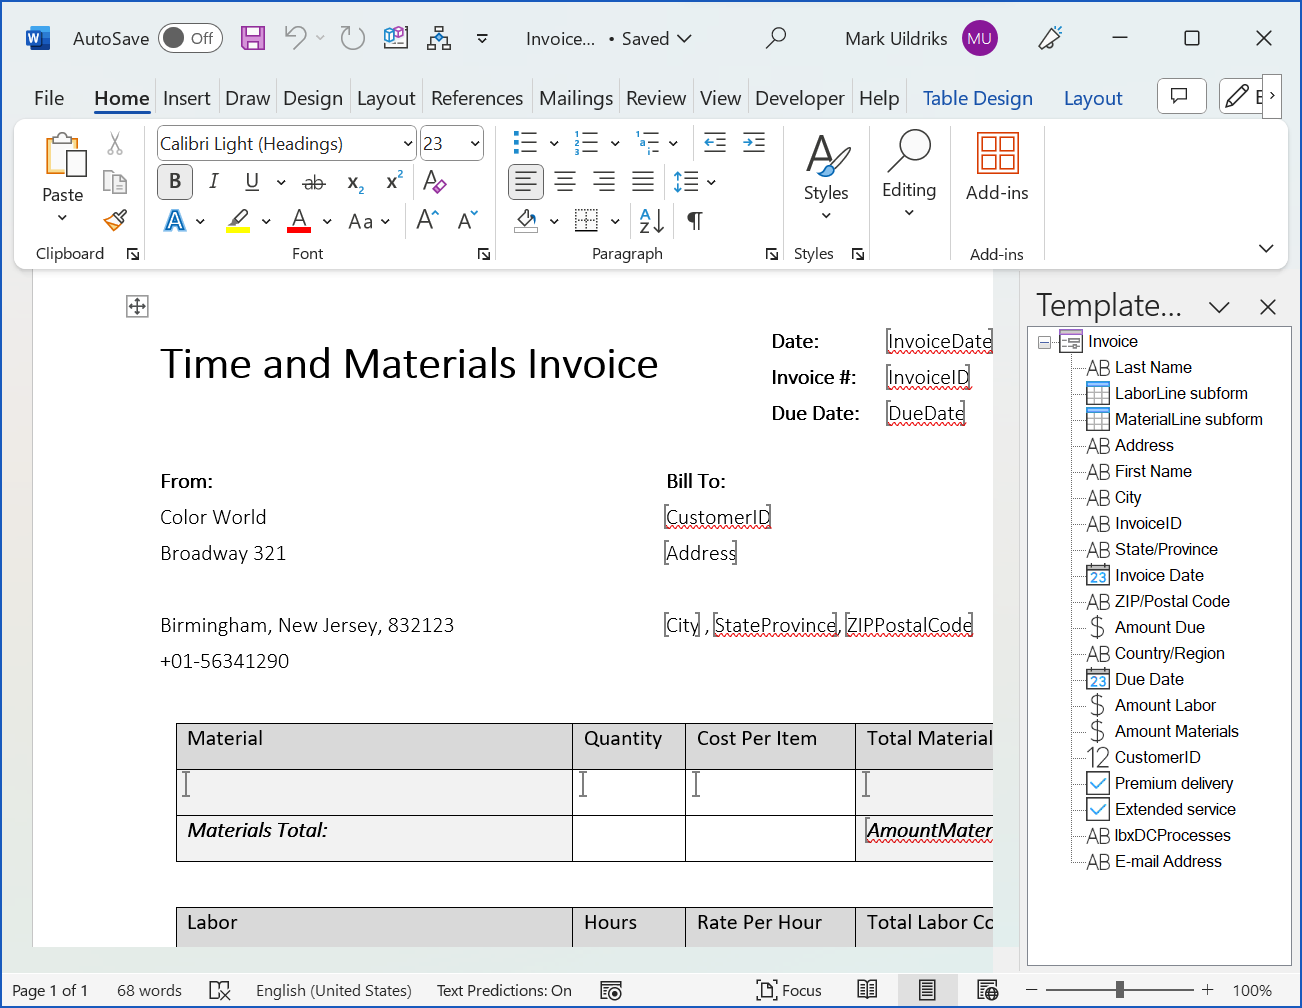 VBA Word document automation: adding bookmarks for a table in word template designer